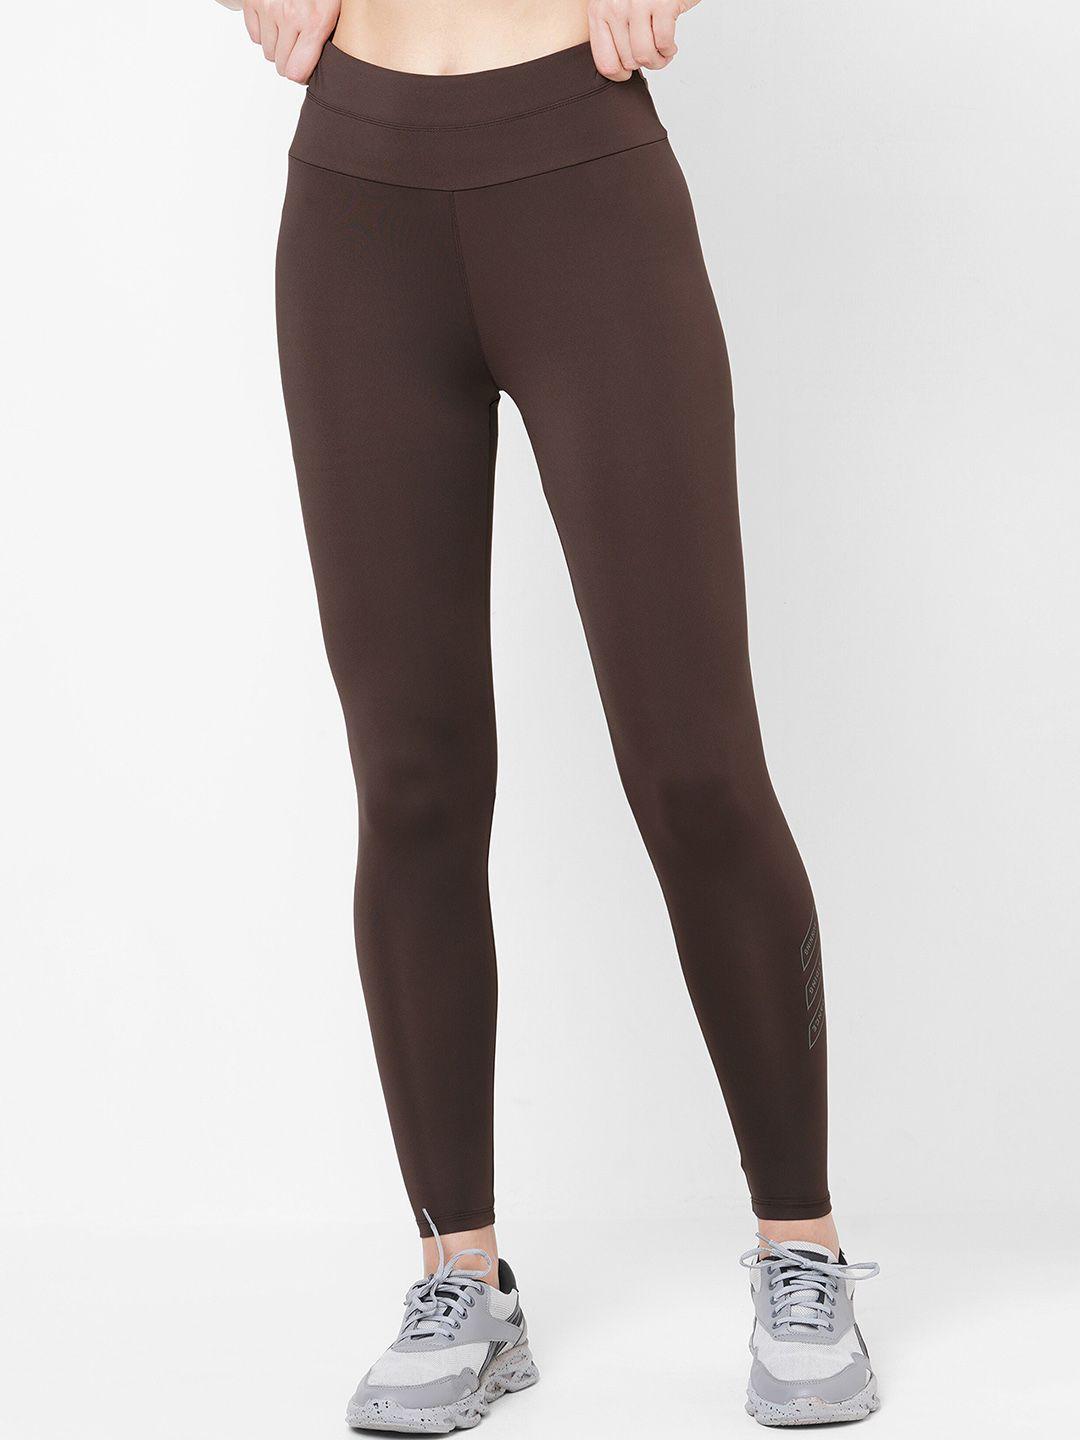 laasa sports women high-rise dry fit tights